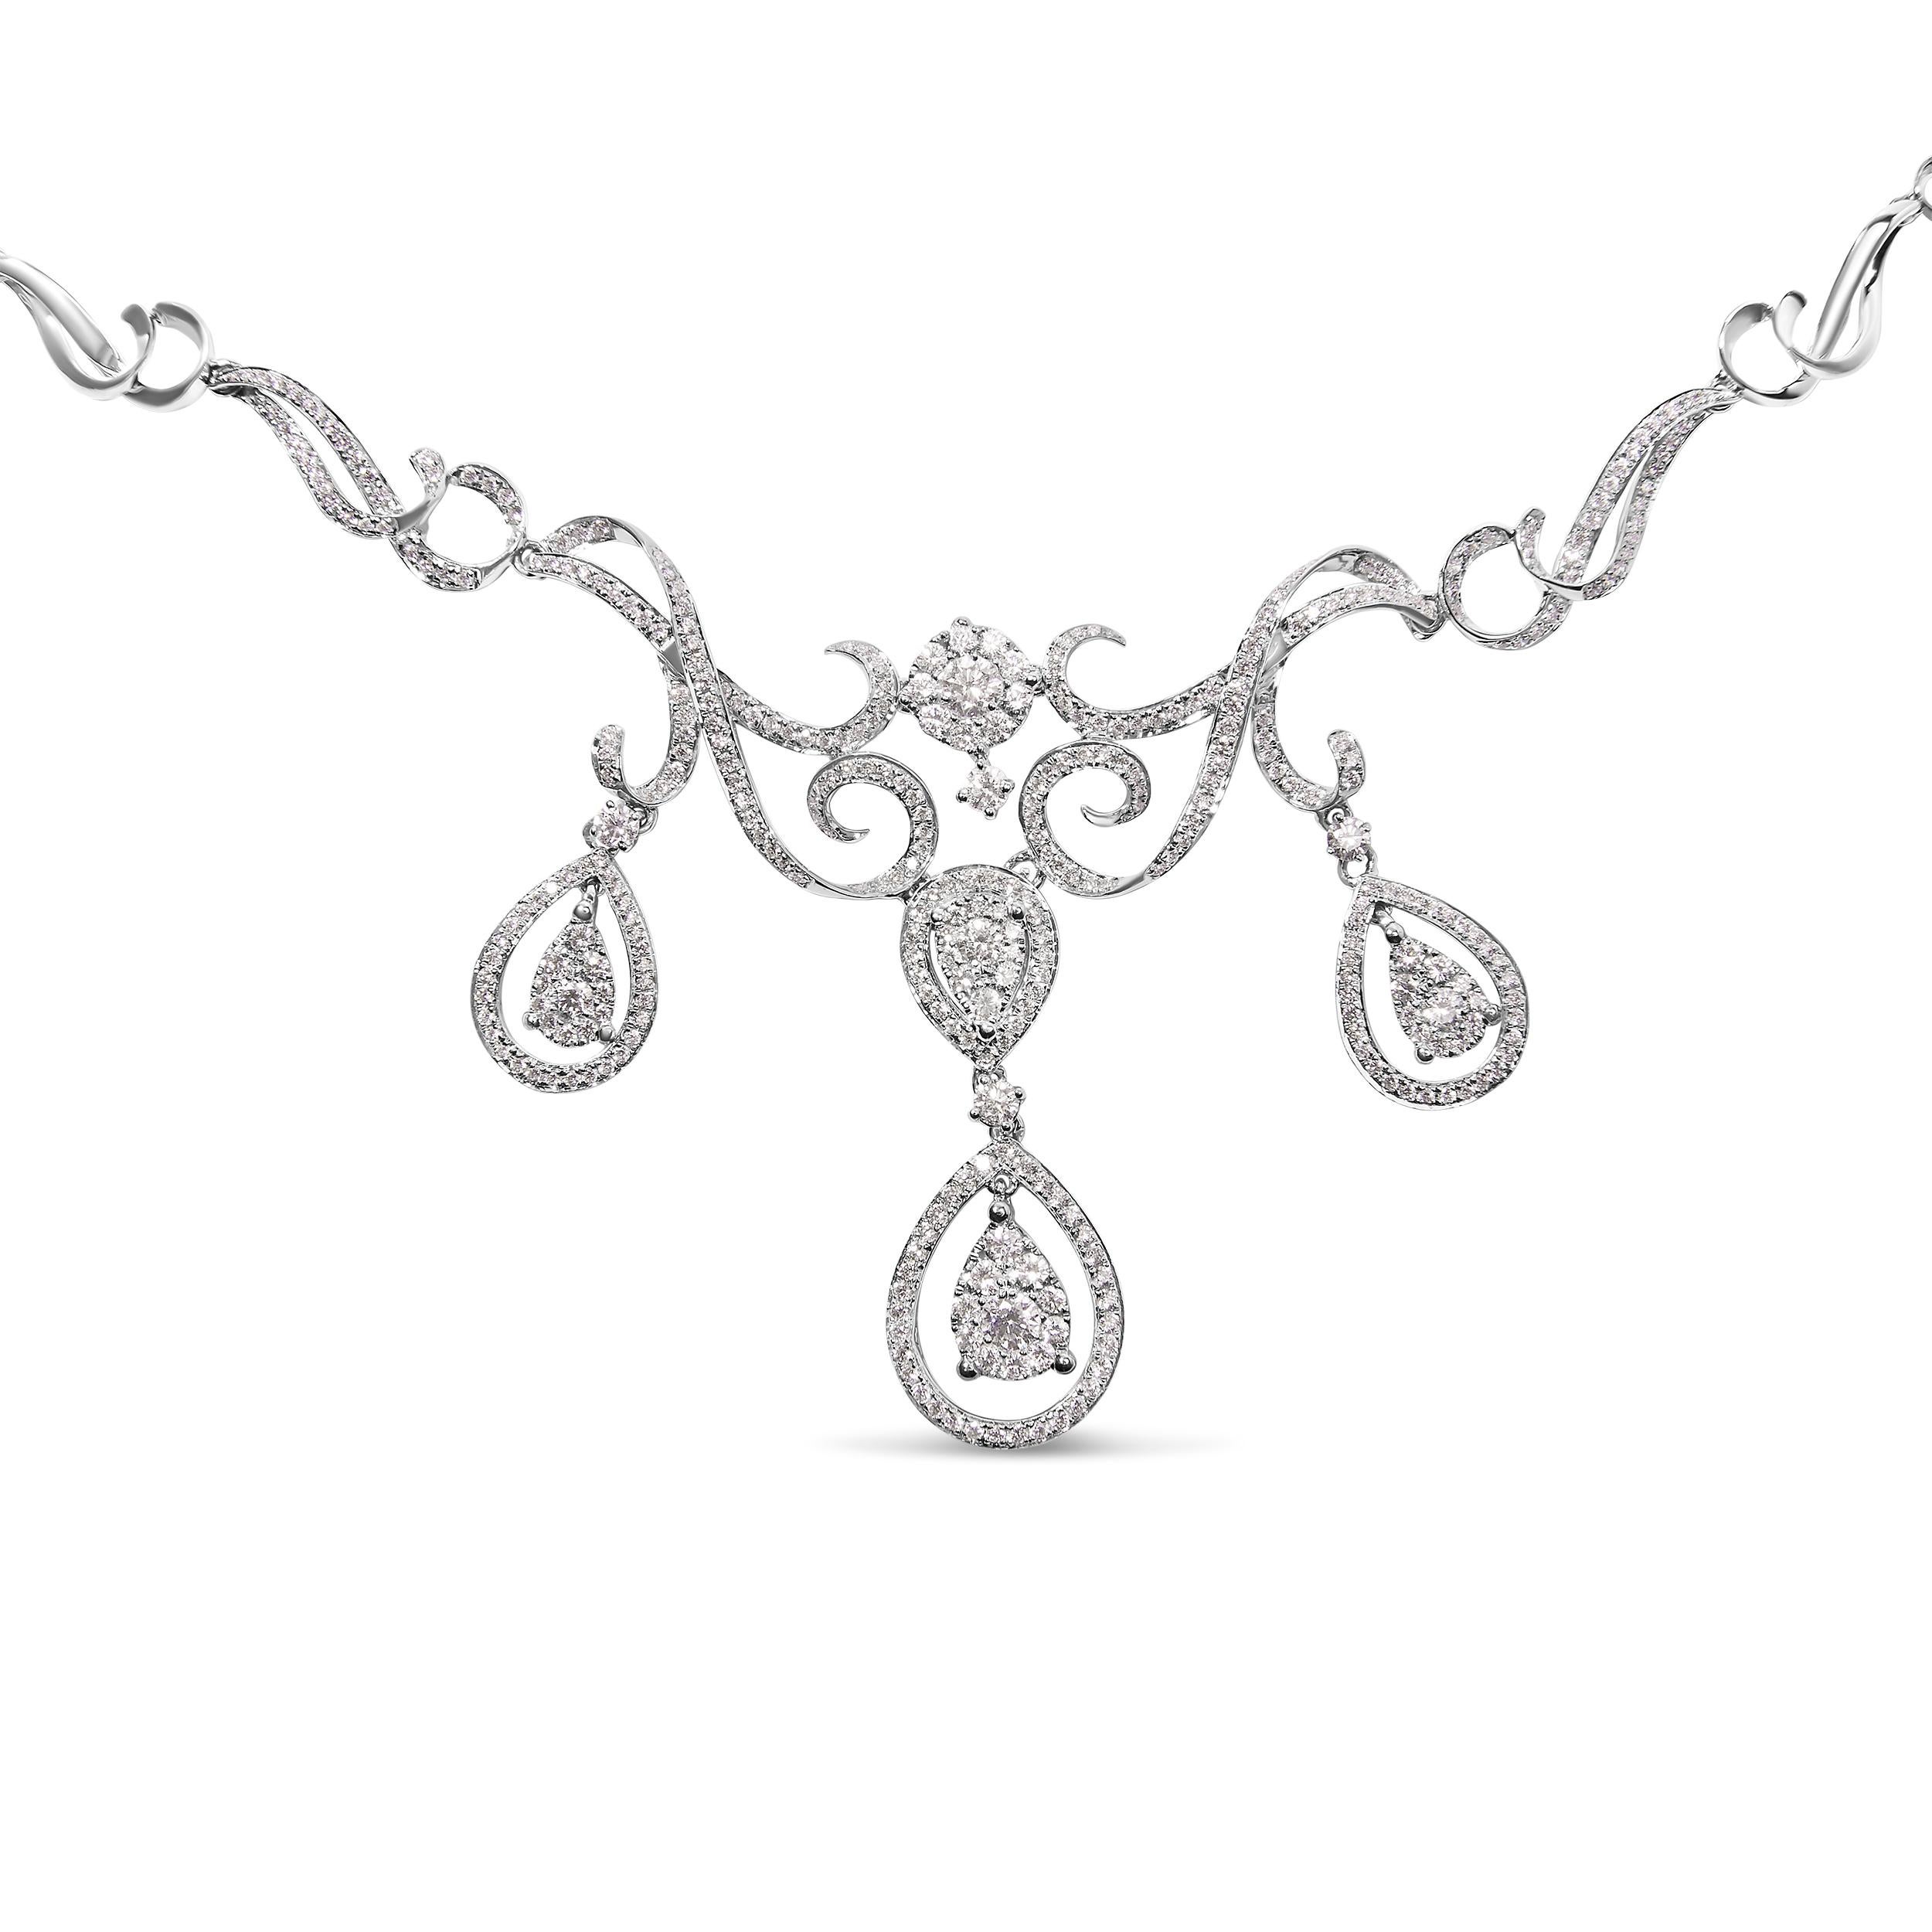 Introducing an opulent expression of elegance and sophistication for the modern woman – a luxurious diamond necklace crafted with G-H color diamonds and SI1-SI2 clarity, making it the perfect addition to any fine jewelry collection. Designed to fit